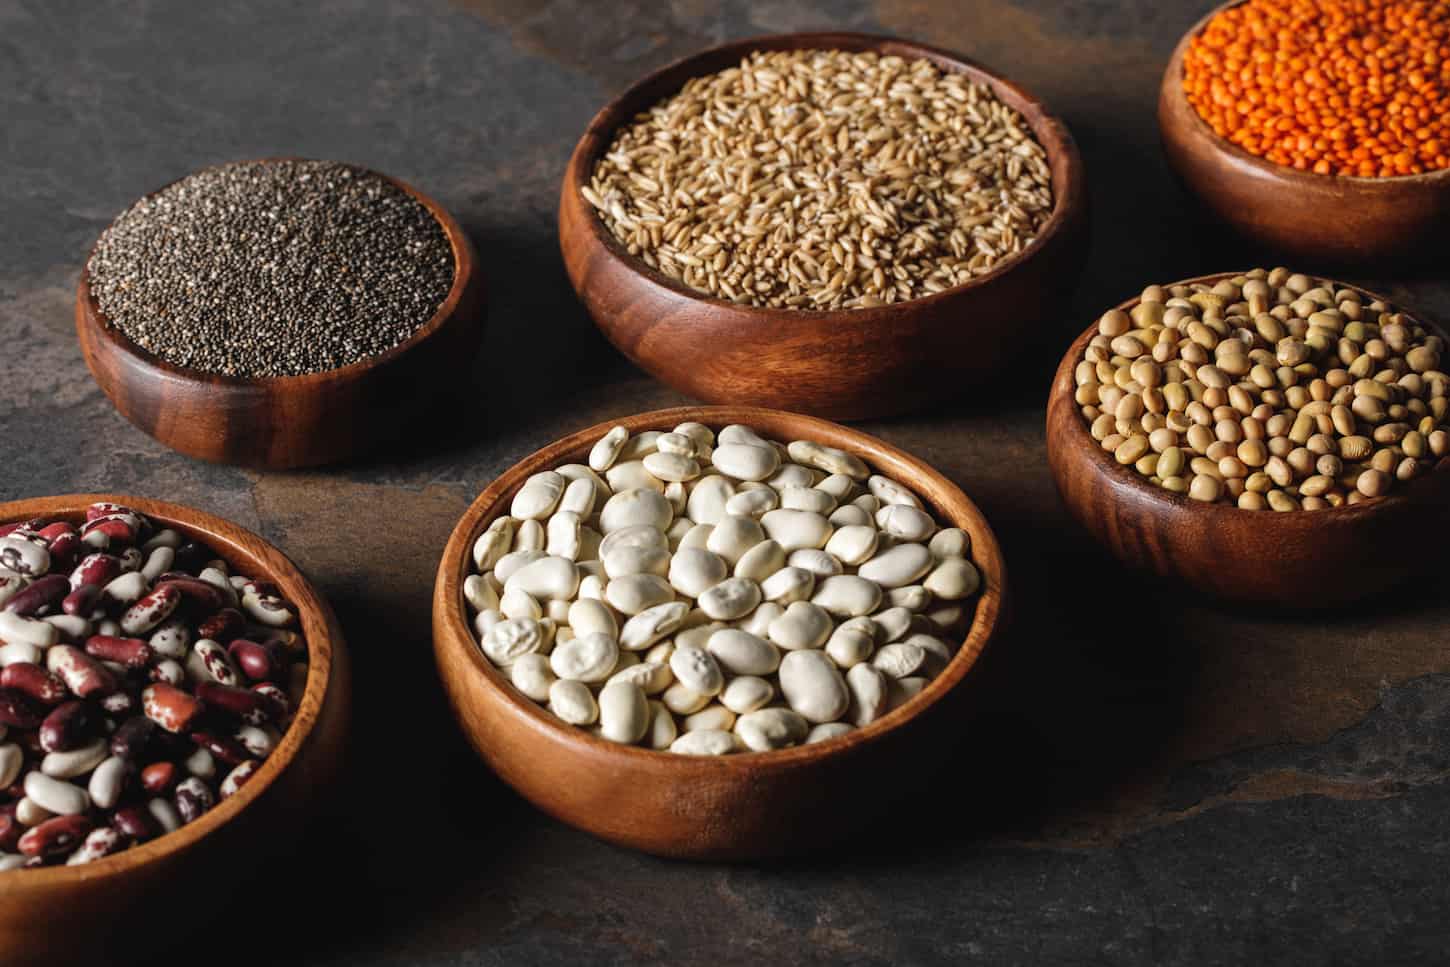 An image of various beans, chia seeds, and oat groats in wooden bowls on the table.